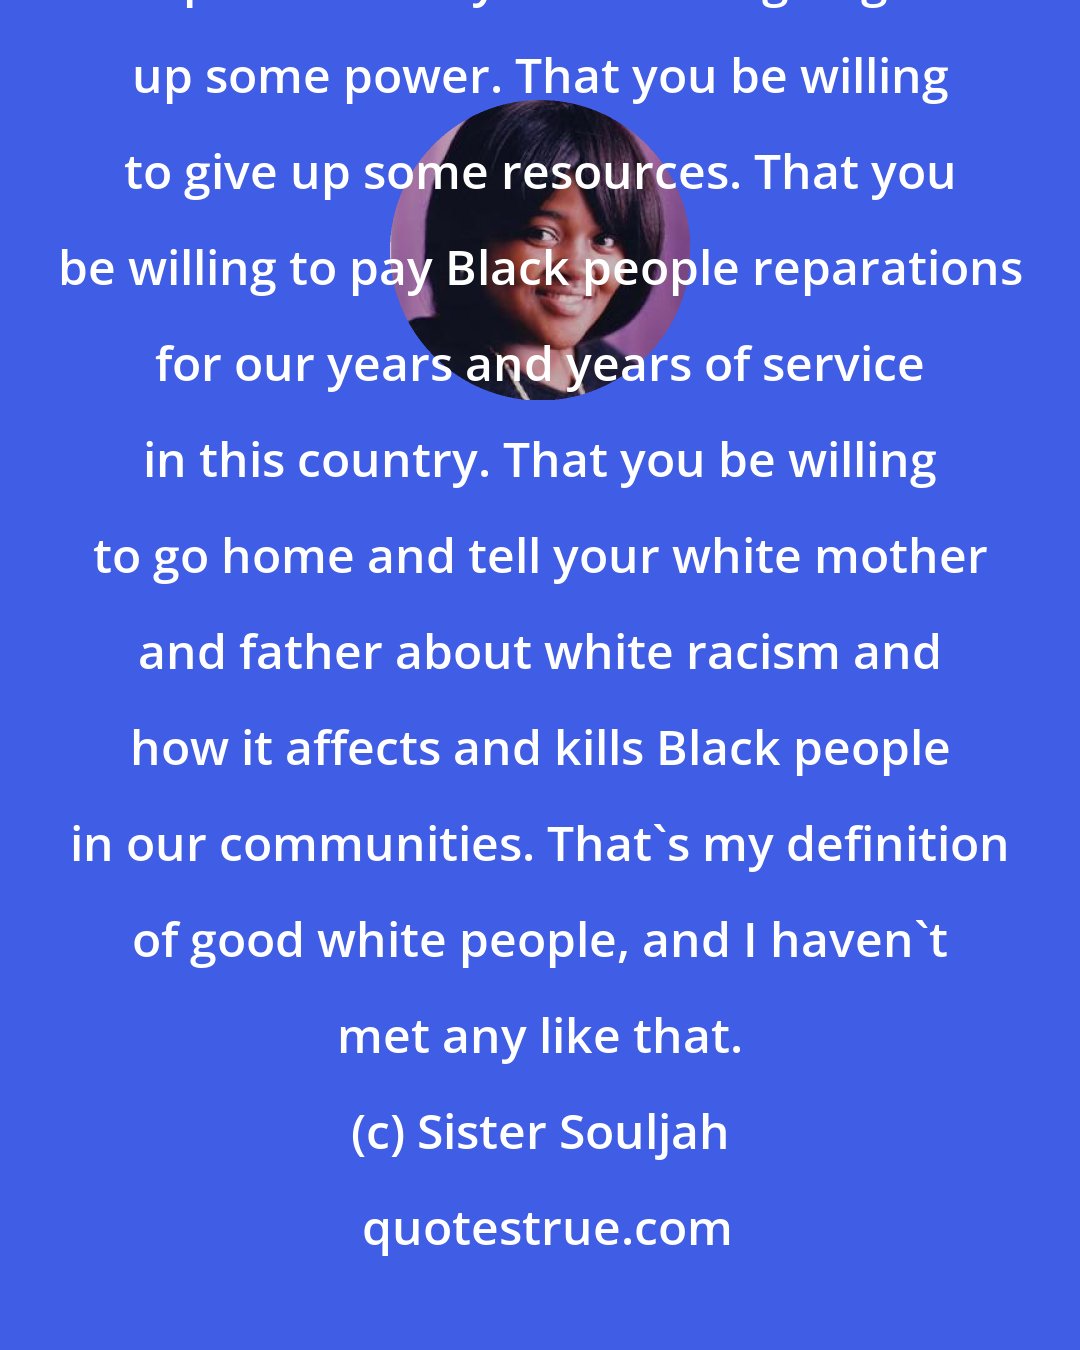 Sister Souljah: My definition of good is that you understand that this is a question of power. That you be willing to give up some power. That you be willing to give up some resources. That you be willing to pay Black people reparations for our years and years of service in this country. That you be willing to go home and tell your white mother and father about white racism and how it affects and kills Black people in our communities. That's my definition of good white people, and I haven't met any like that.